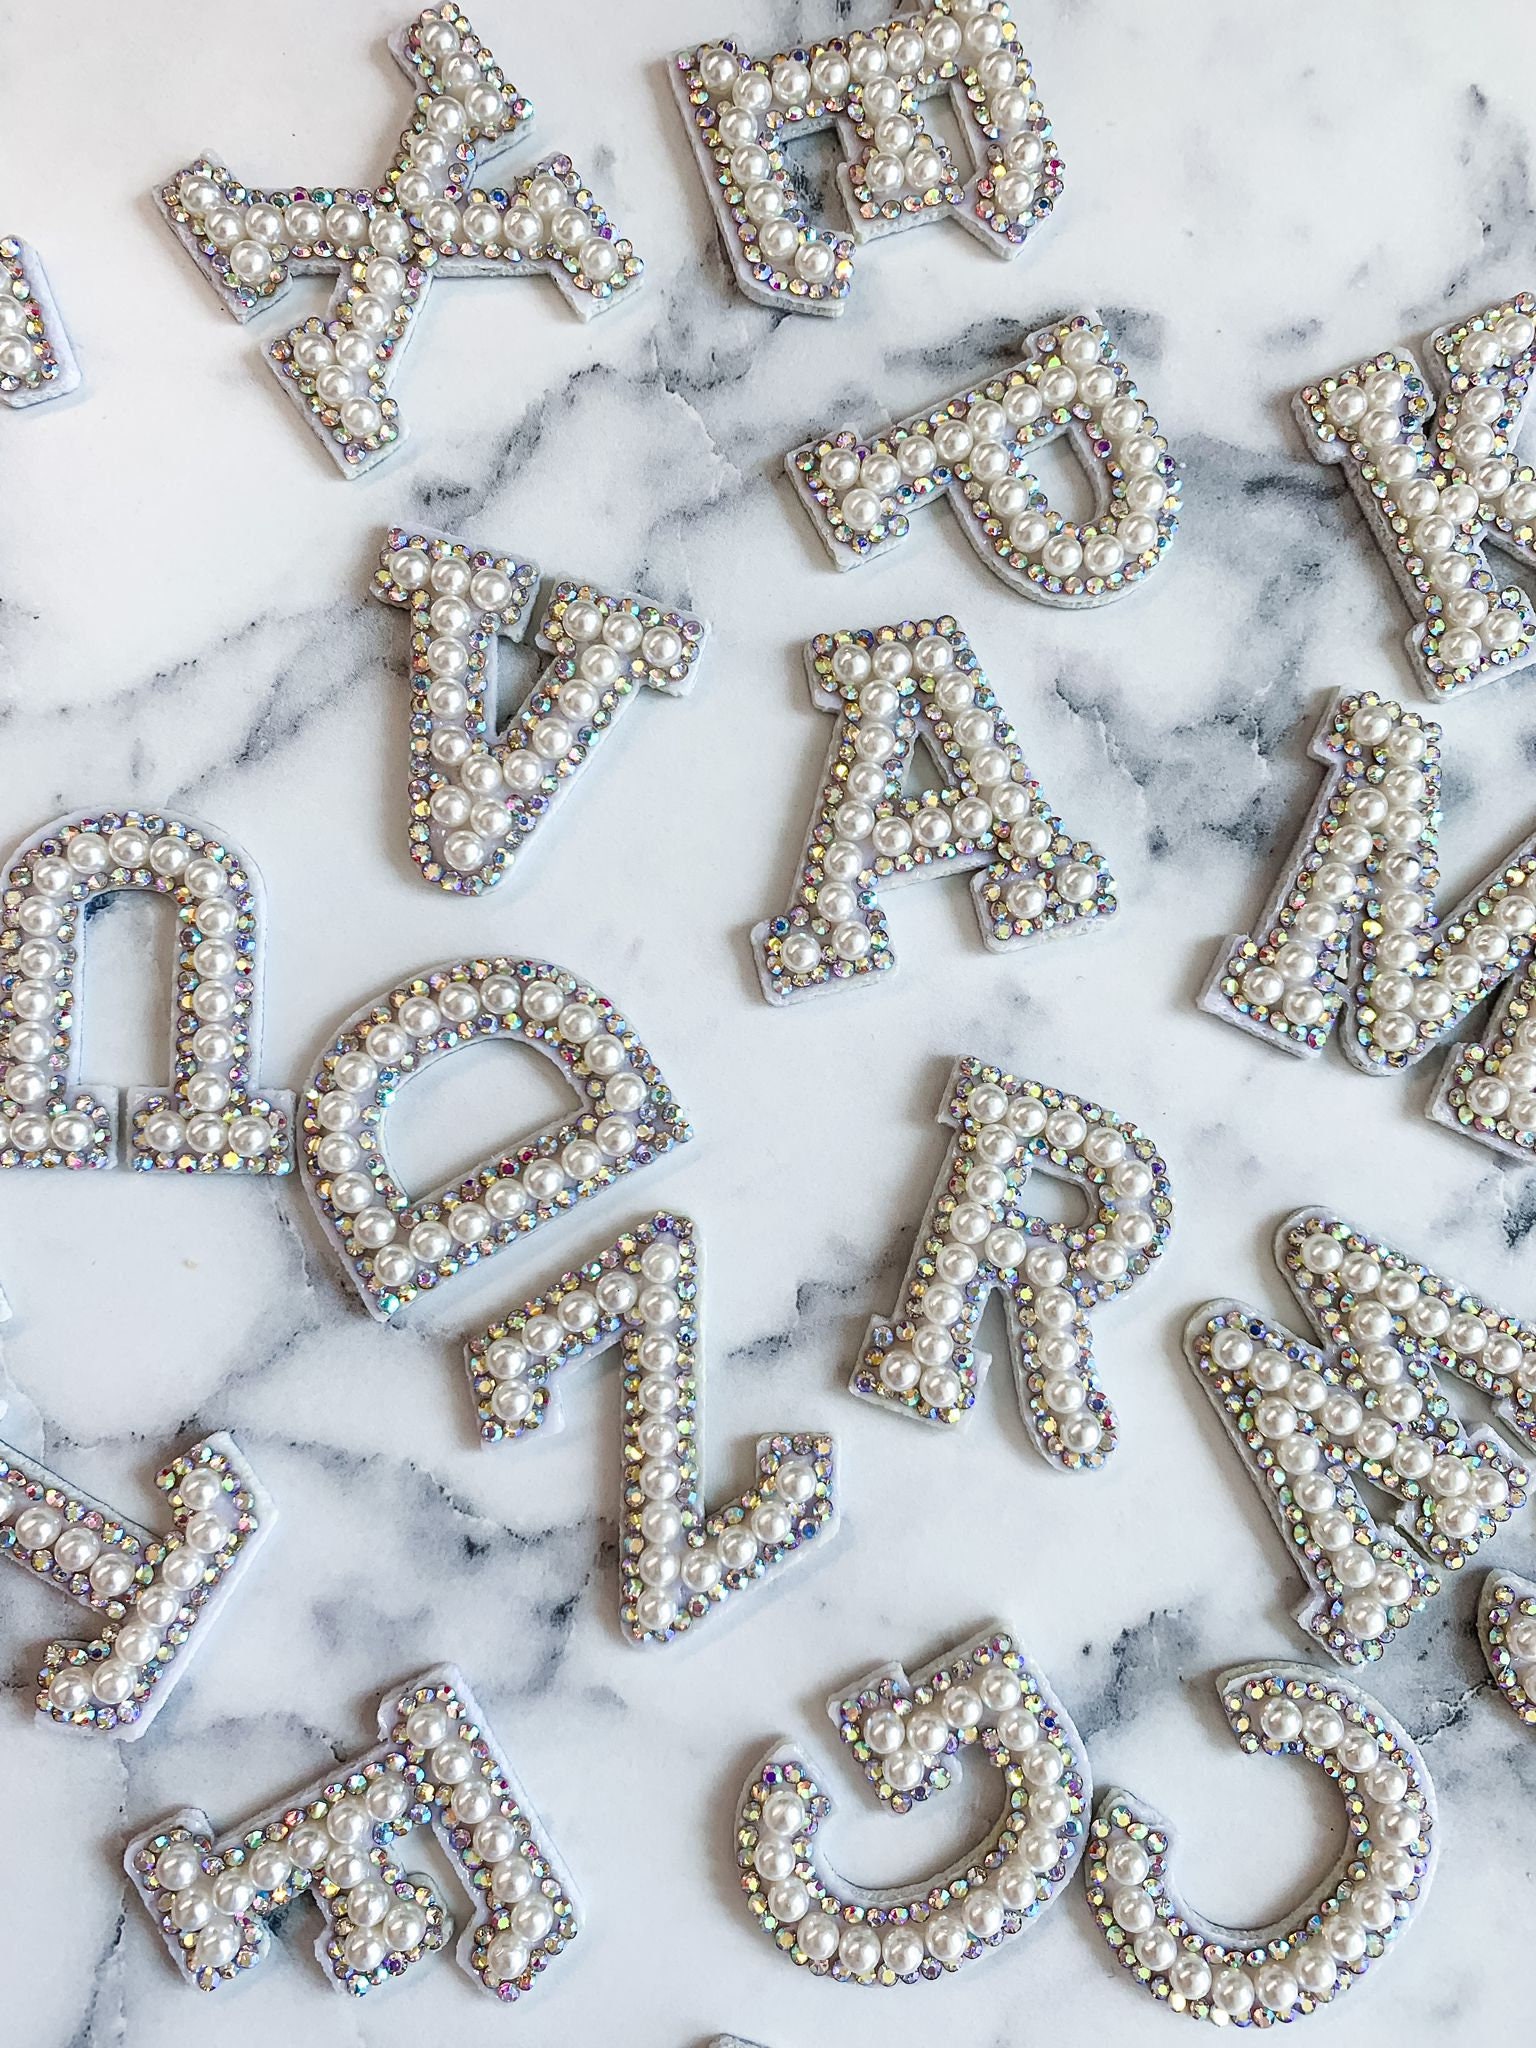 A-Z Letter White Pearl Rhinestone Patch, 26 Pieces Ironing Patch Glitter  Pearl Rhinestone Letters, Iron on Letters English Alphabet Iron On Letters